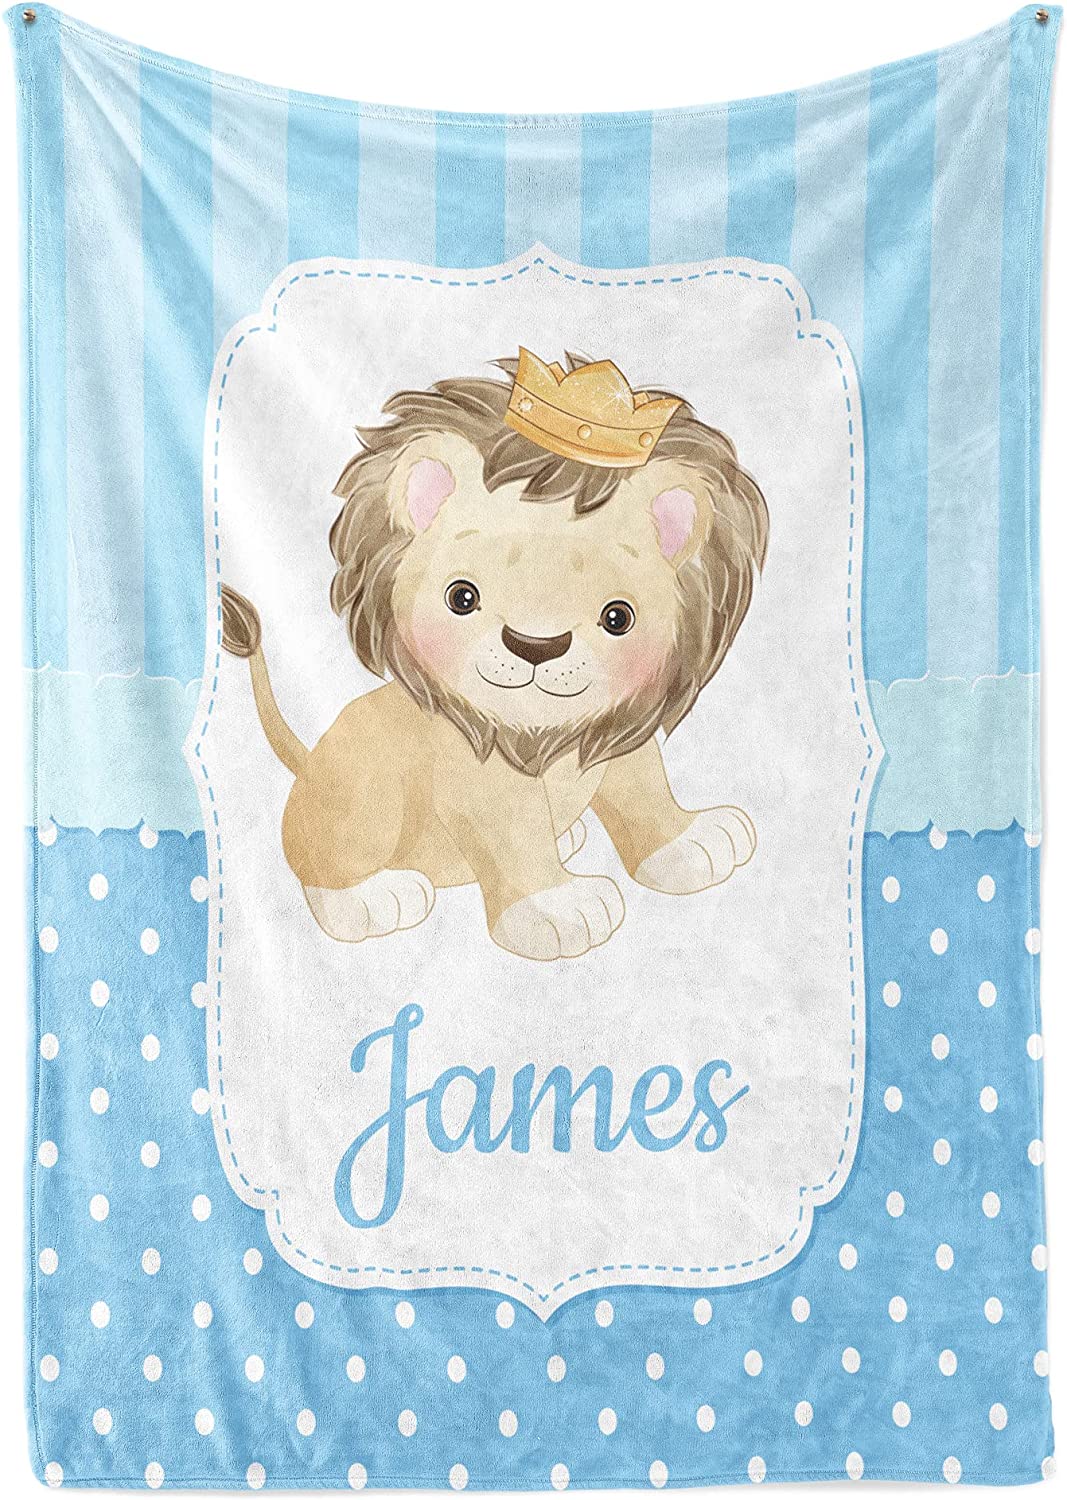 Baby Blankets Boys Baby Animal, Baby Gifts, Baby Items, Baby Boy Gifts, Baby Stuff, Custom Baby Gifts